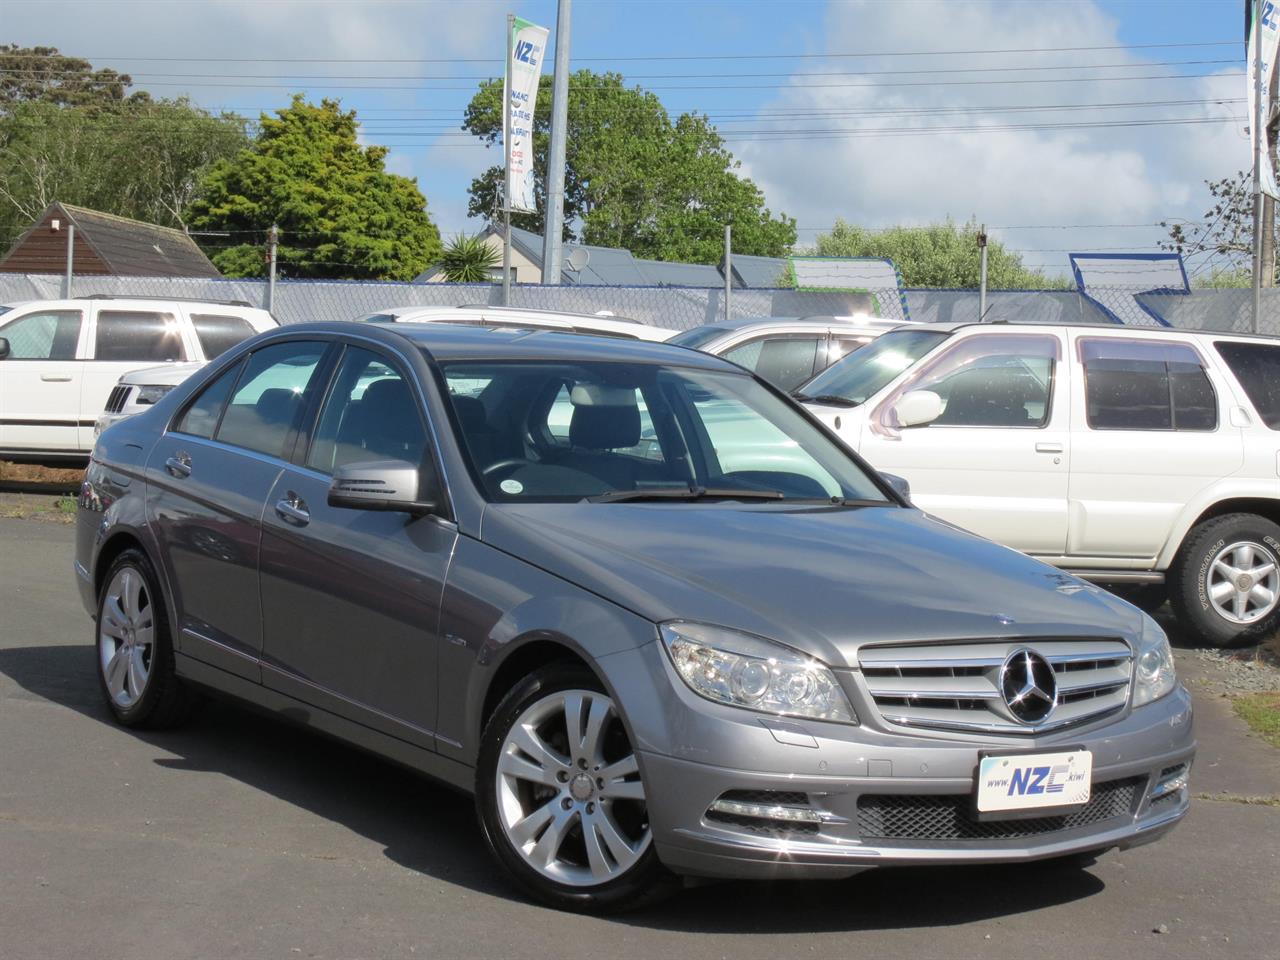 NZC 2010 MERCEDES BENZ C 200 just arrived to Auckland